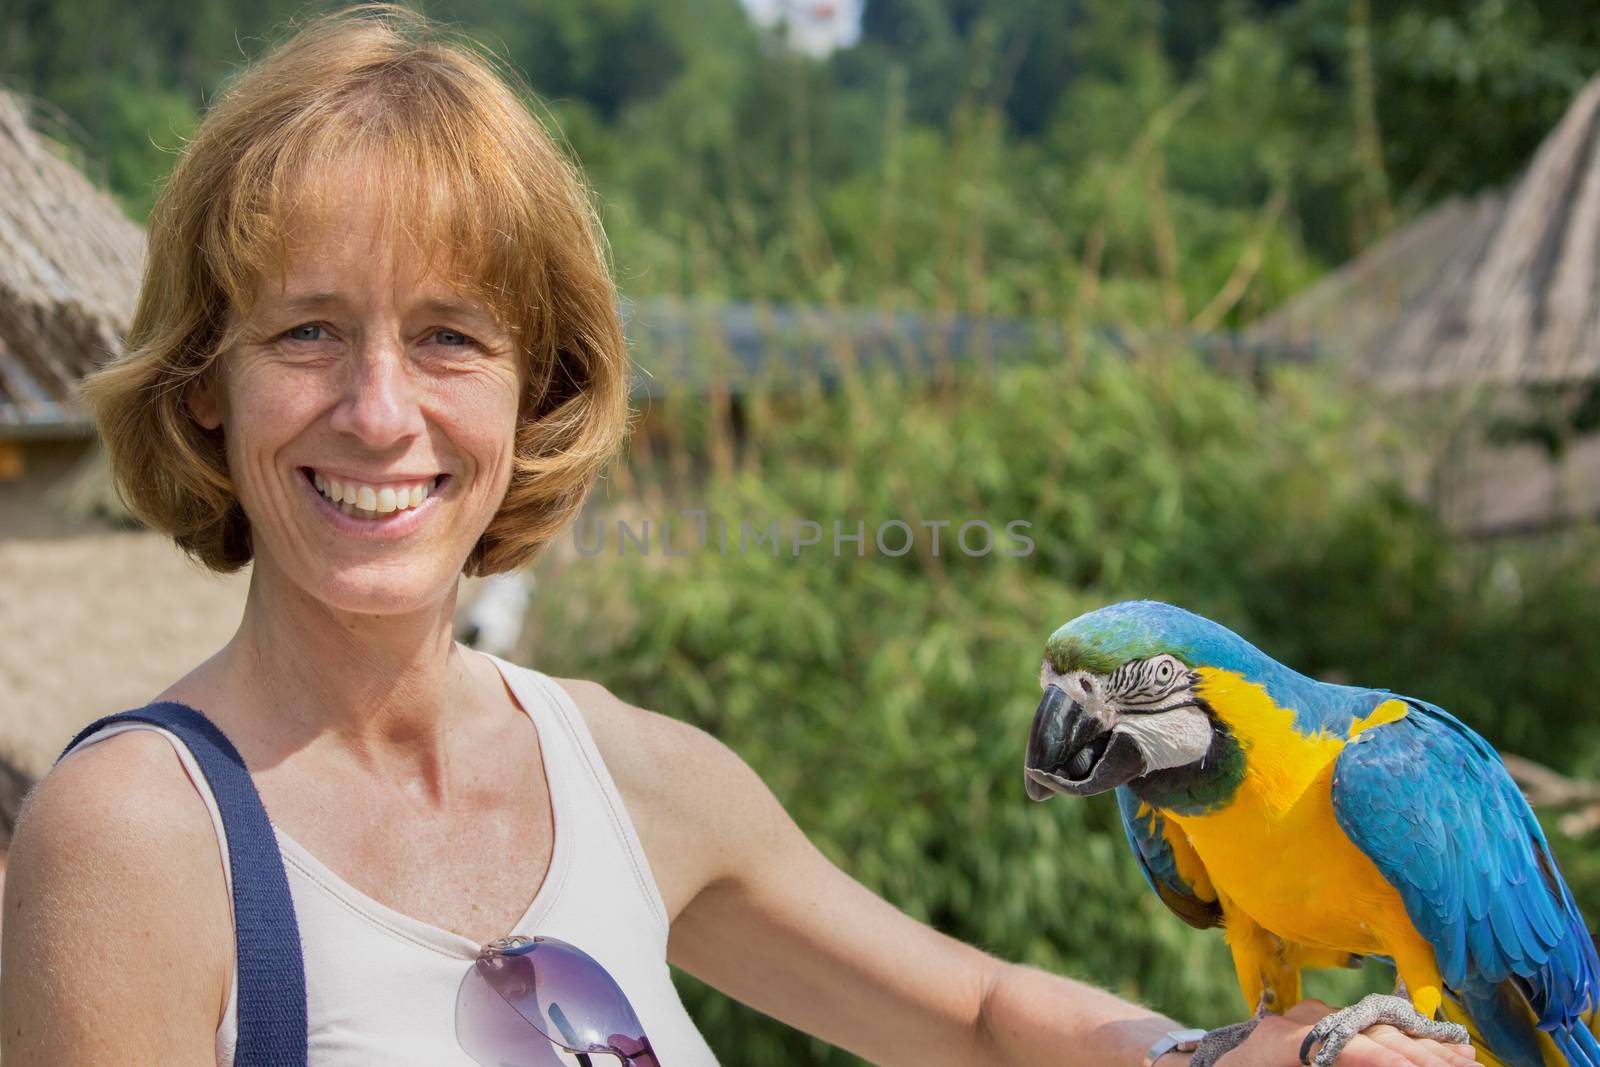 Woman holding macaw on her arm by BenSchonewille